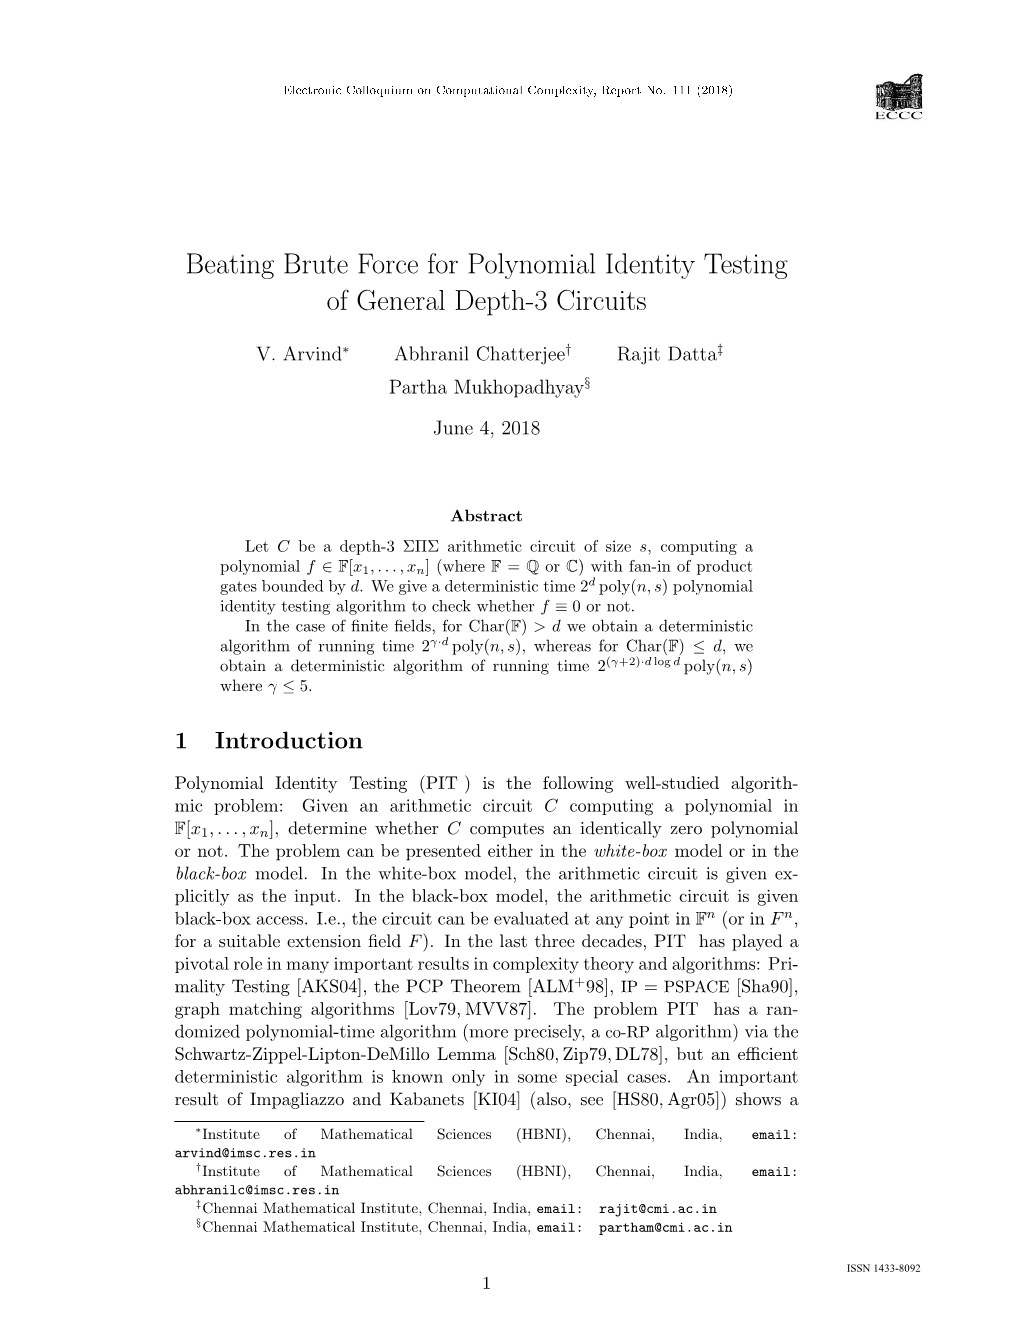 Beating Brute Force for Polynomial Identity Testing of General Depth-3 Circuits